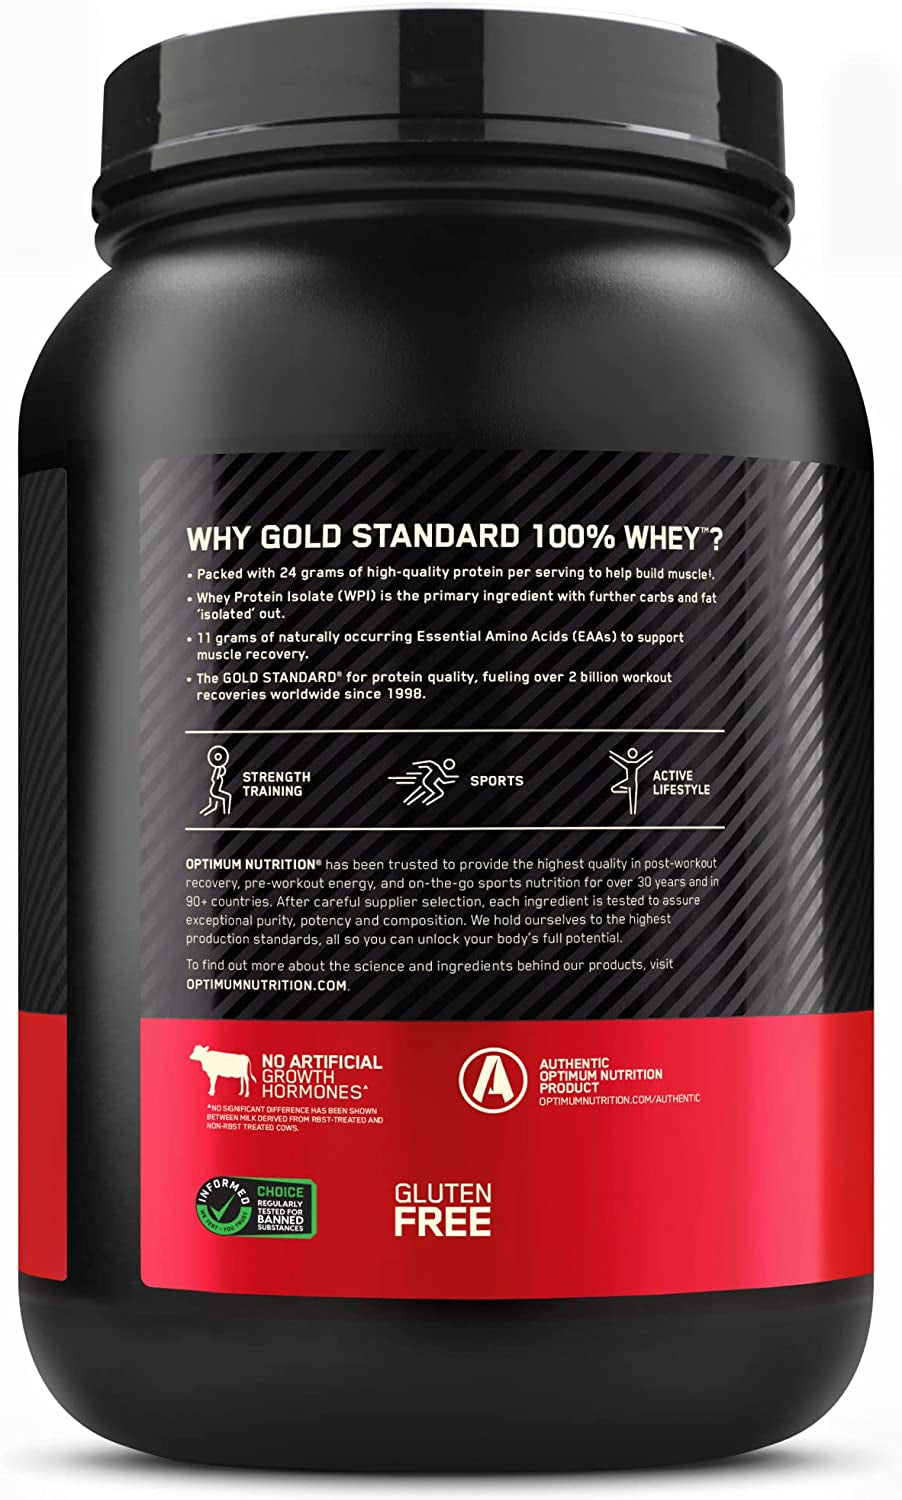 Gold Standard 100% Whey Muscle Building and Recovery Protein Powder with Naturally Occurring Glutamine and BCAA Amino Acids, Extreme Milk Chocolate Flavour, 28 Servings, 896 G